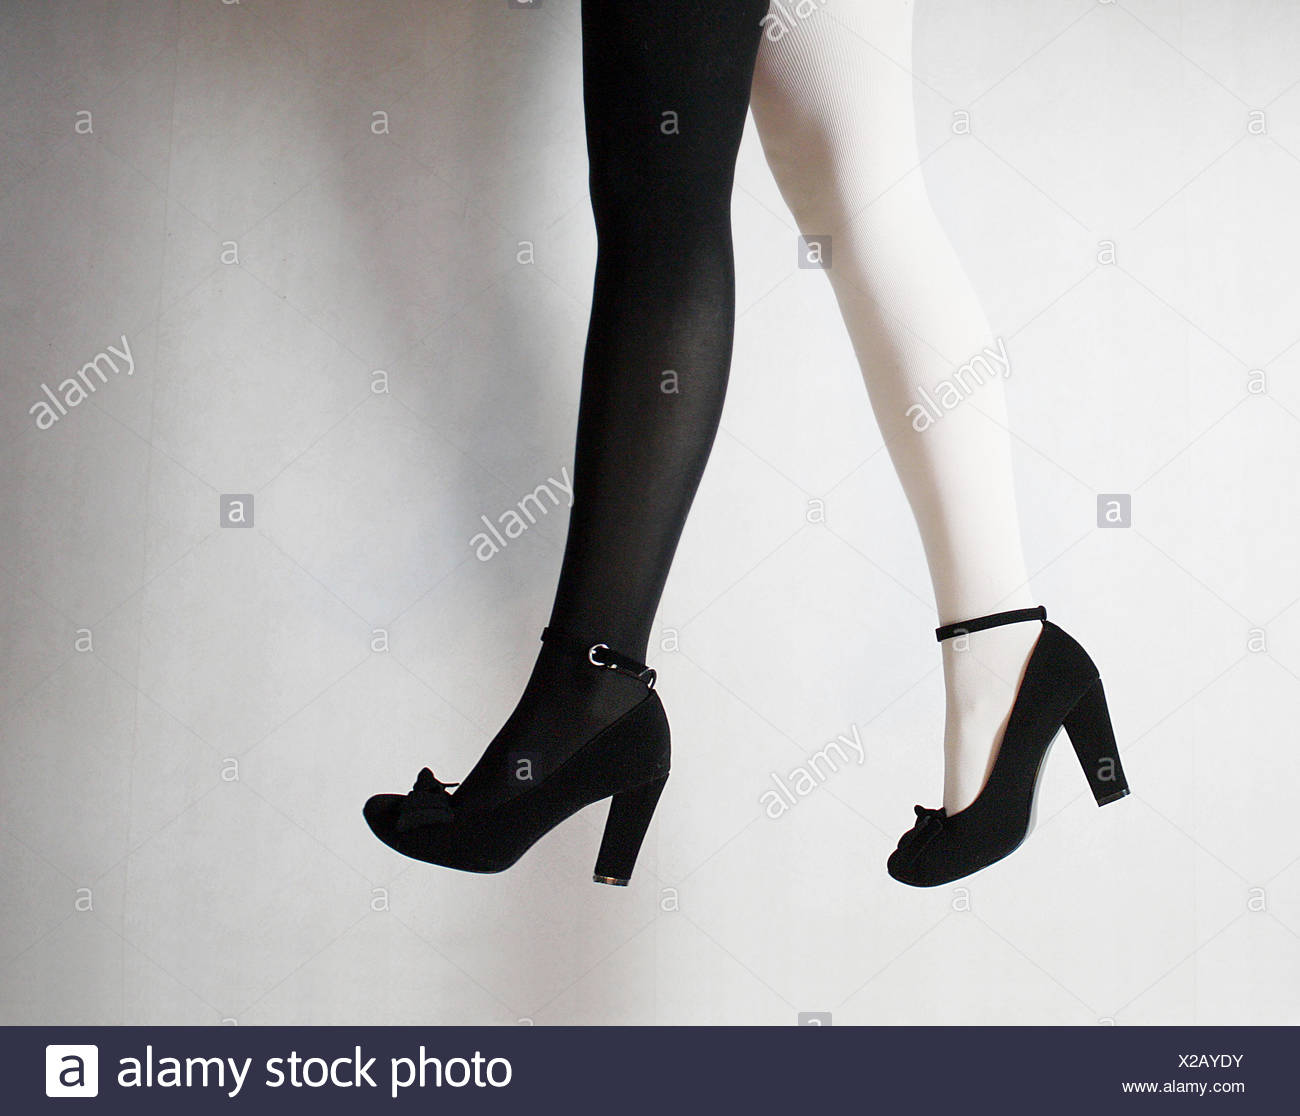 stockings with heels